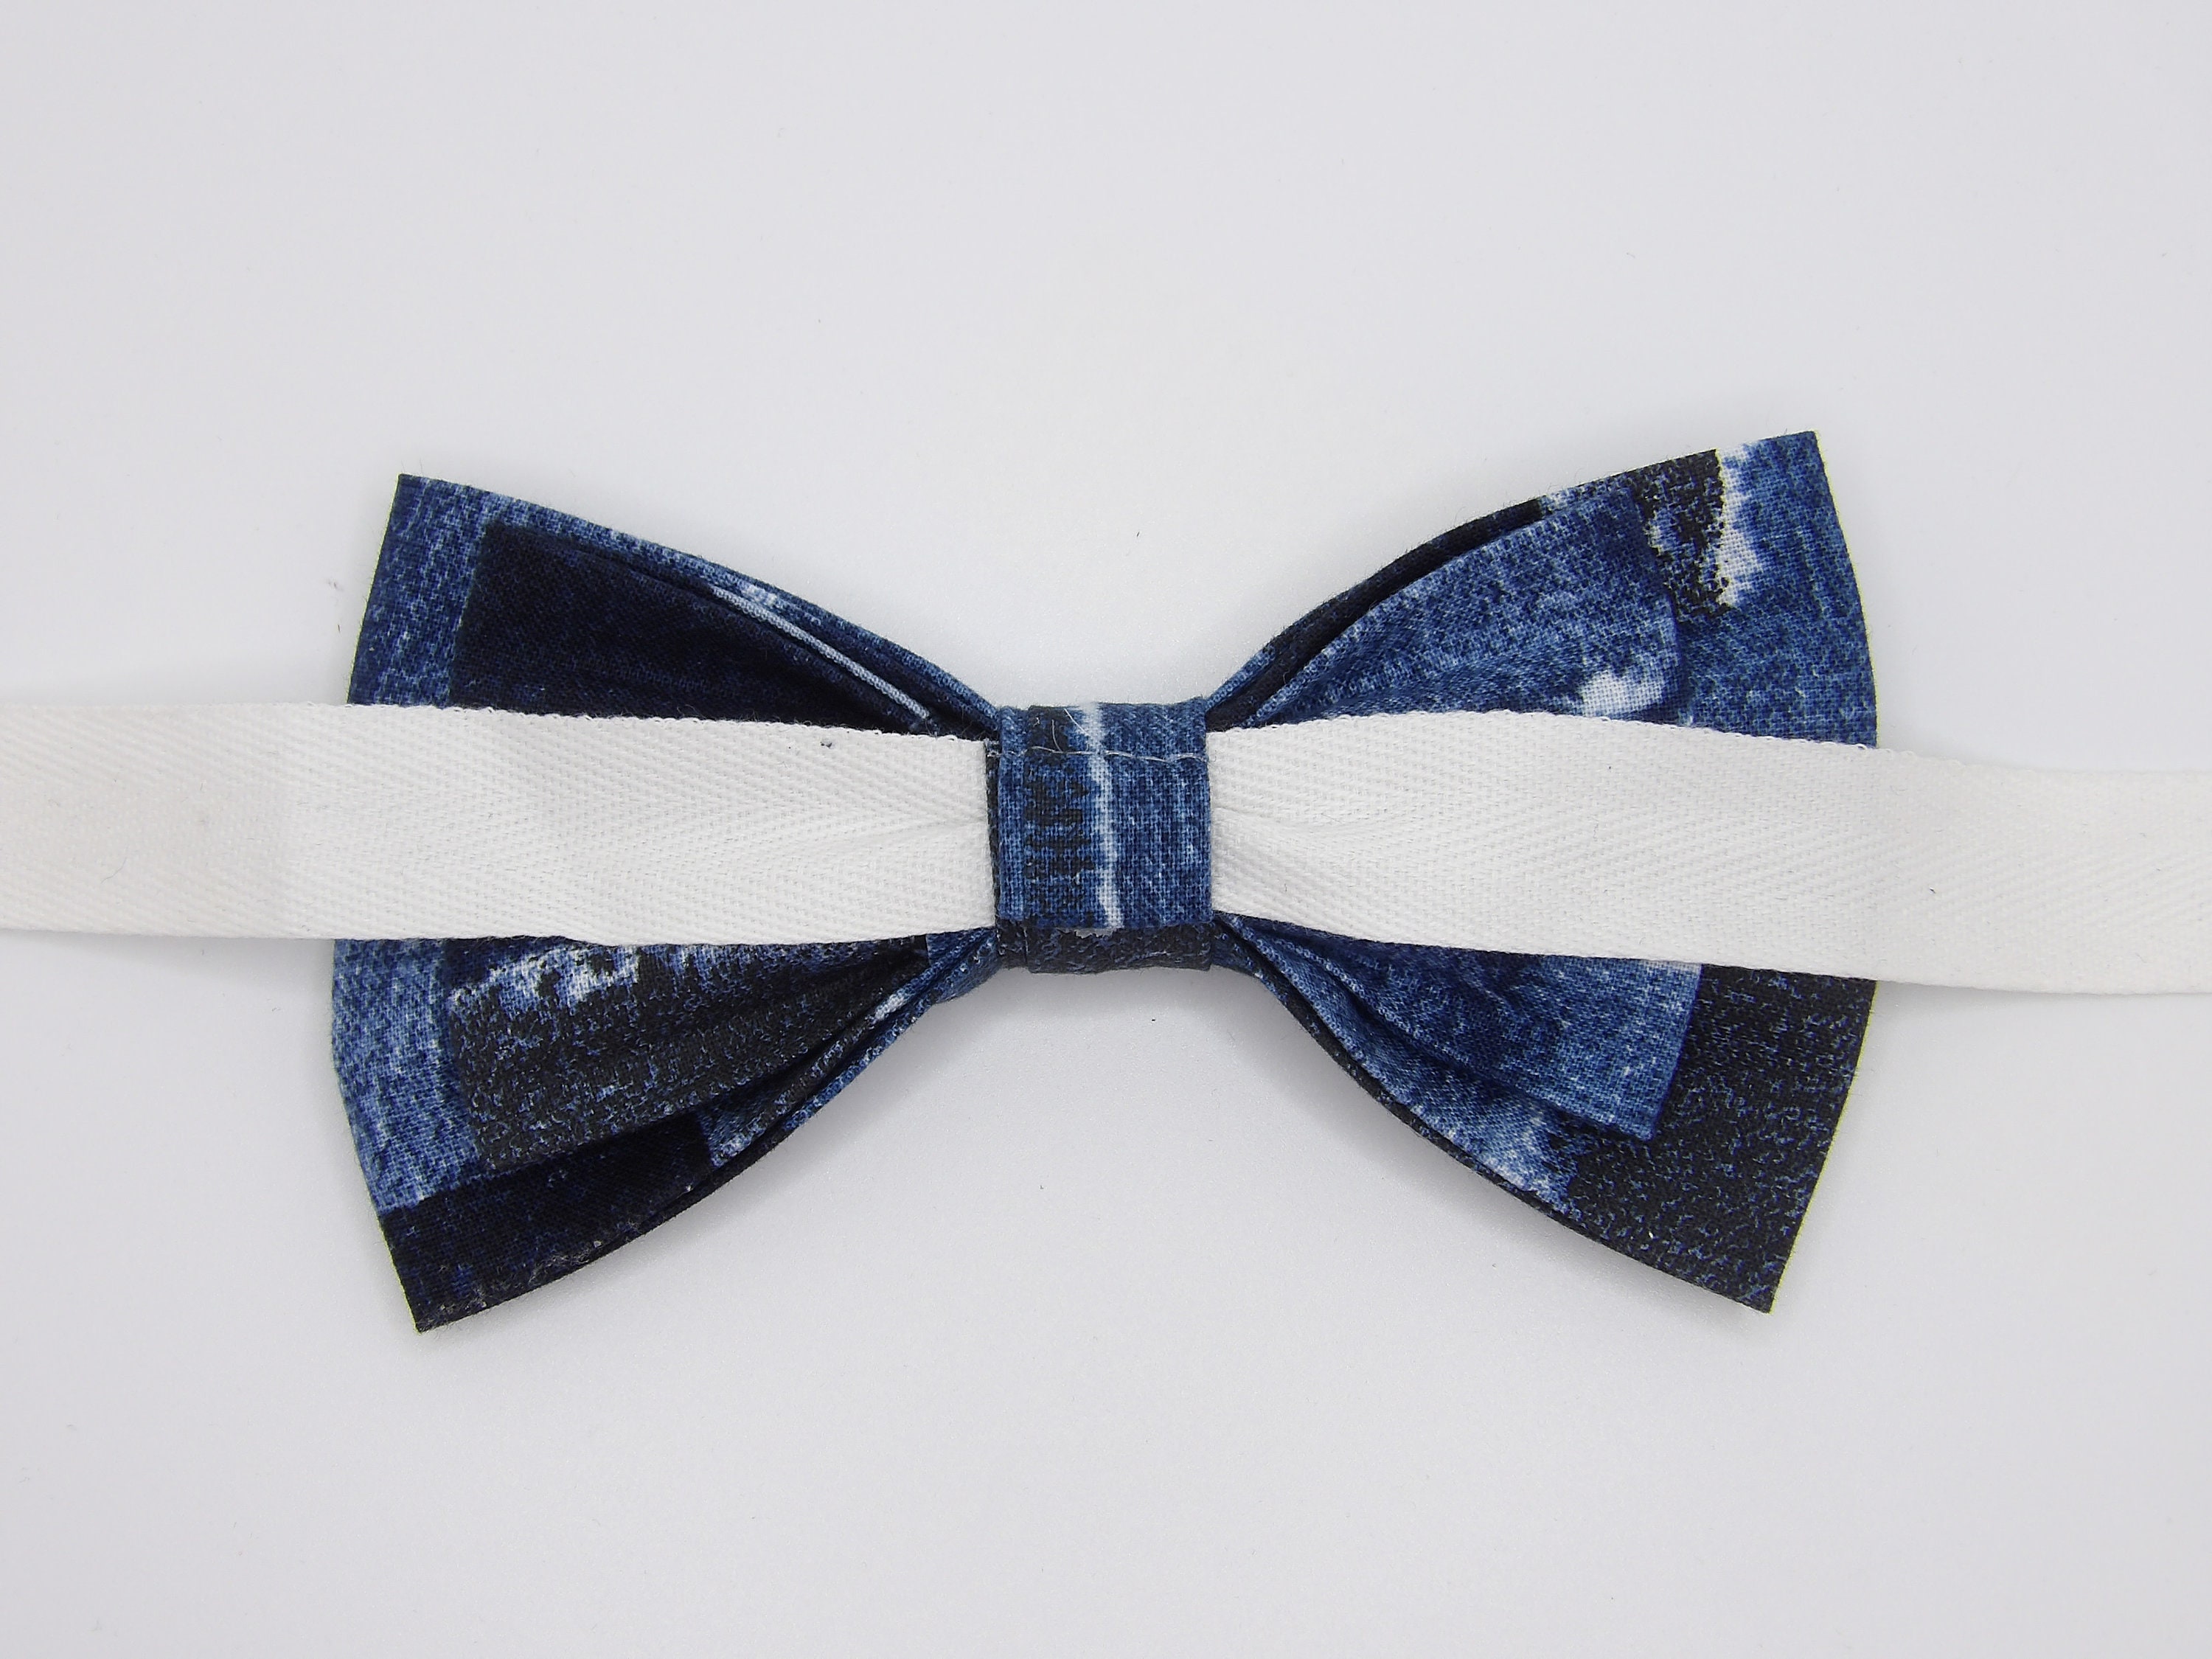 Denim Bow tie / Blue Jean Patches / Shades of Navy Blue / A Little